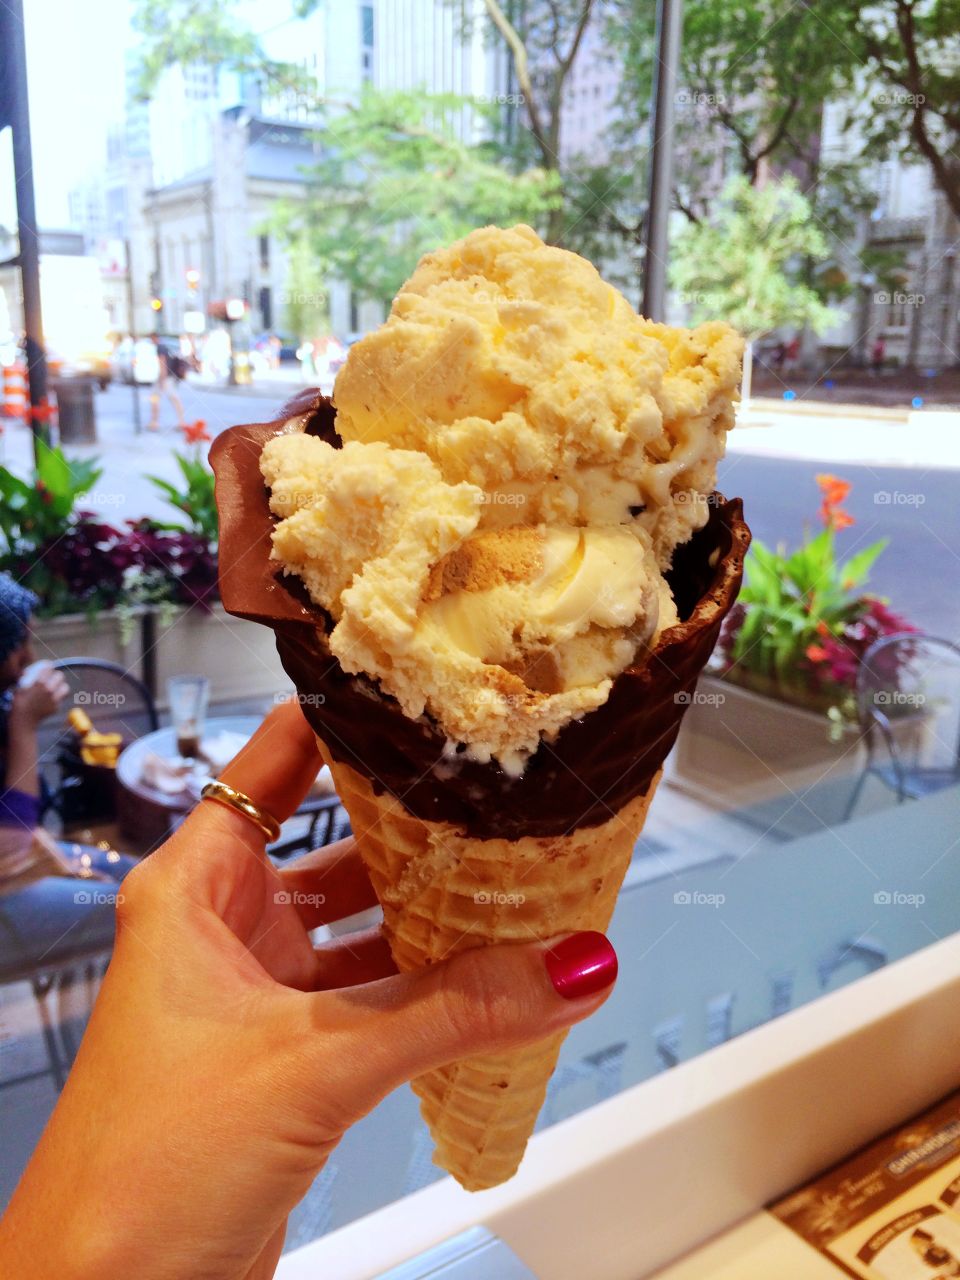 Heaven in a Cone. Taken at ghirardelli's in downtown Chicago 